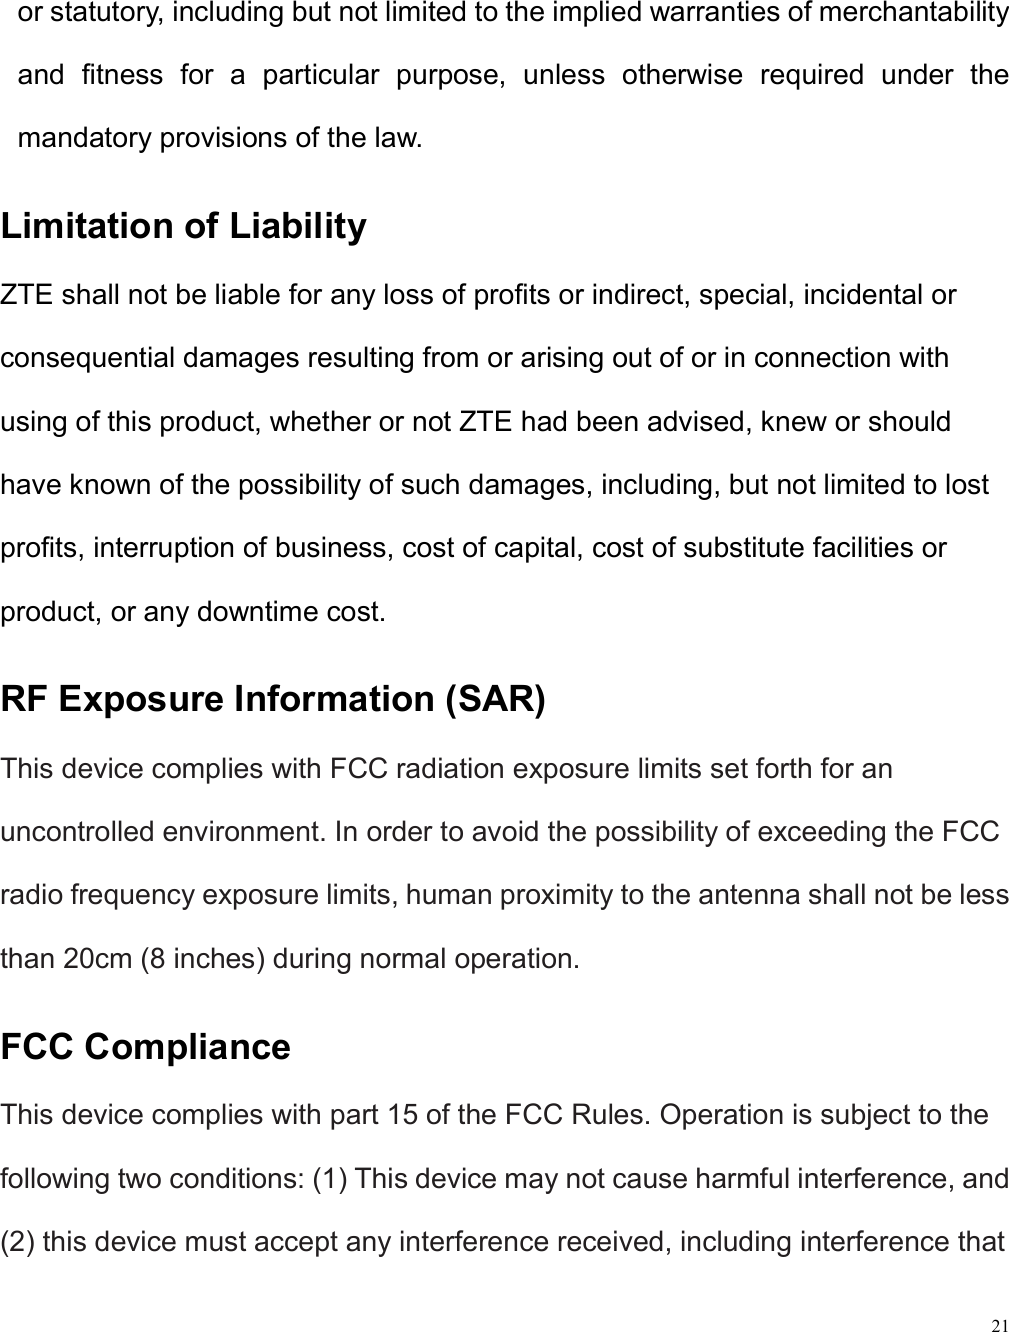 21  or statutory, including but not limited to the implied warranties of merchantability and  fitness  for  a  particular  purpose,  unless  otherwise  required  under  the mandatory provisions of the law. Limitation of Liability ZTE shall not be liable for any loss of profits or indirect, special, incidental or consequential damages resulting from or arising out of or in connection with using of this product, whether or not ZTE had been advised, knew or should have known of the possibility of such damages, including, but not limited to lost profits, interruption of business, cost of capital, cost of substitute facilities or product, or any downtime cost. RF Exposure Information (SAR) This device complies with FCC radiation exposure limits set forth for an uncontrolled environment. In order to avoid the possibility of exceeding the FCC radio frequency exposure limits, human proximity to the antenna shall not be less than 20cm (8 inches) during normal operation. FCC Compliance This device complies with part 15 of the FCC Rules. Operation is subject to the following two conditions: (1) This device may not cause harmful interference, and (2) this device must accept any interference received, including interference that 